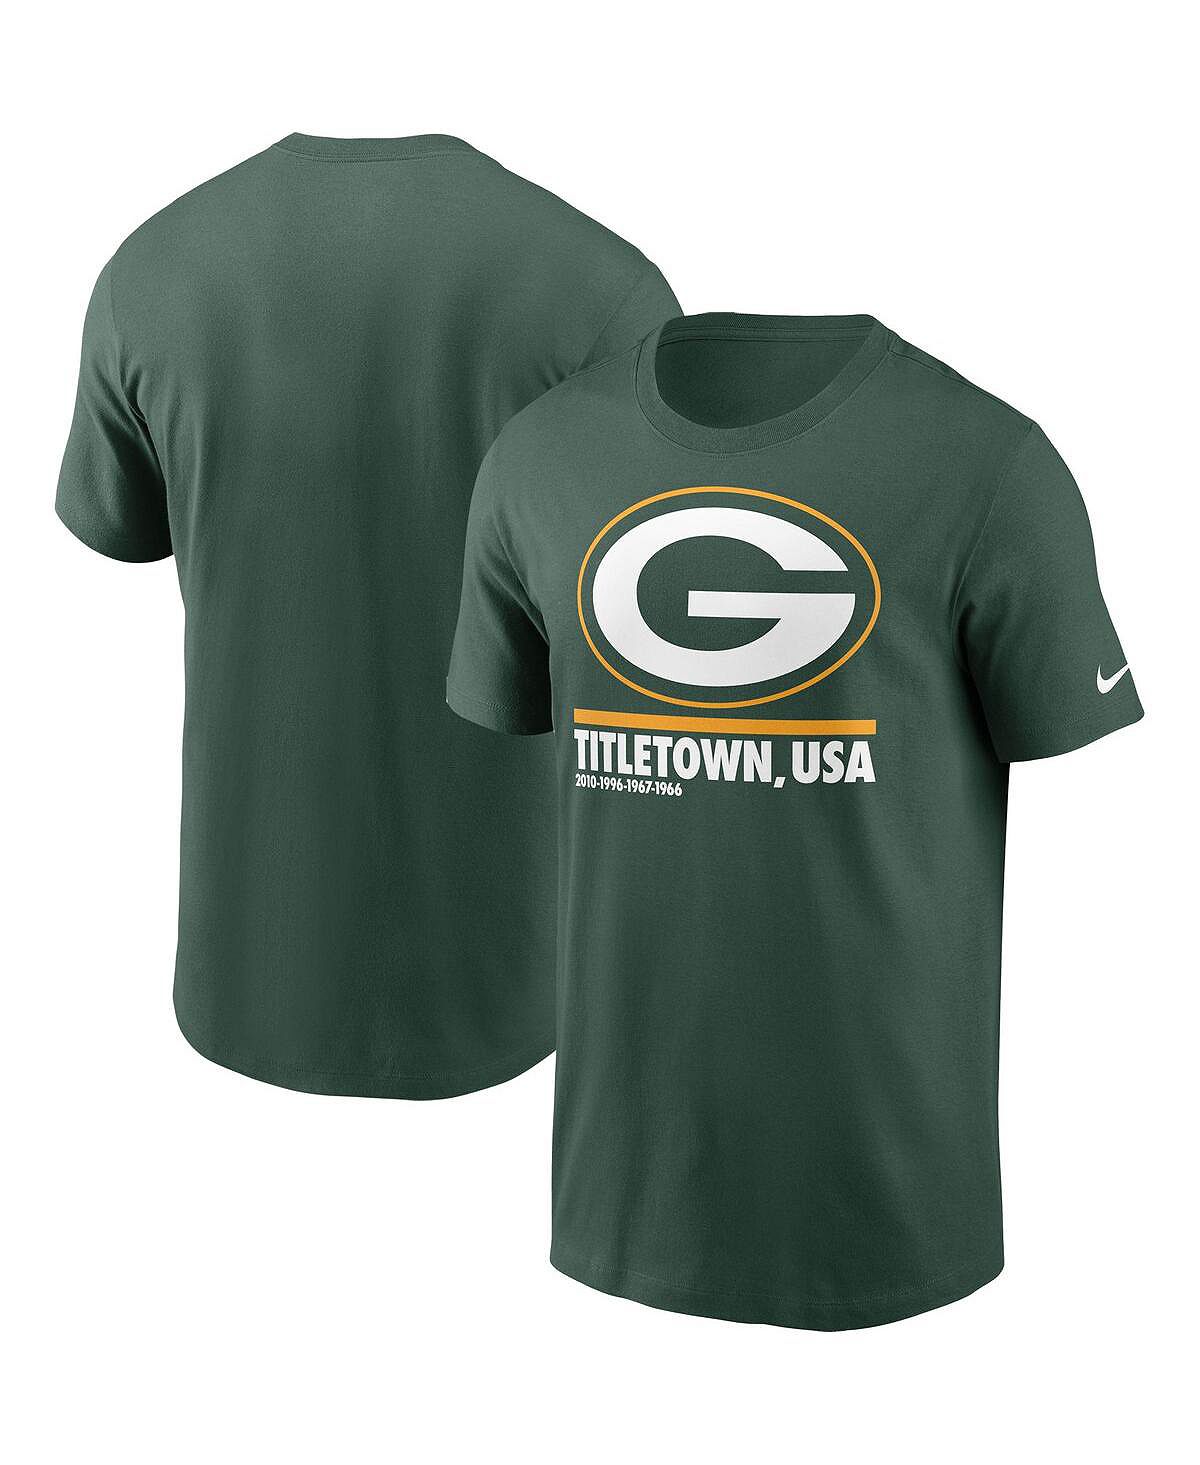 Мужская футболка green green bay packers hometown collection title town Nike, зеленый мужская футболка aaron rodgers green green bay packers game team nike зеленый